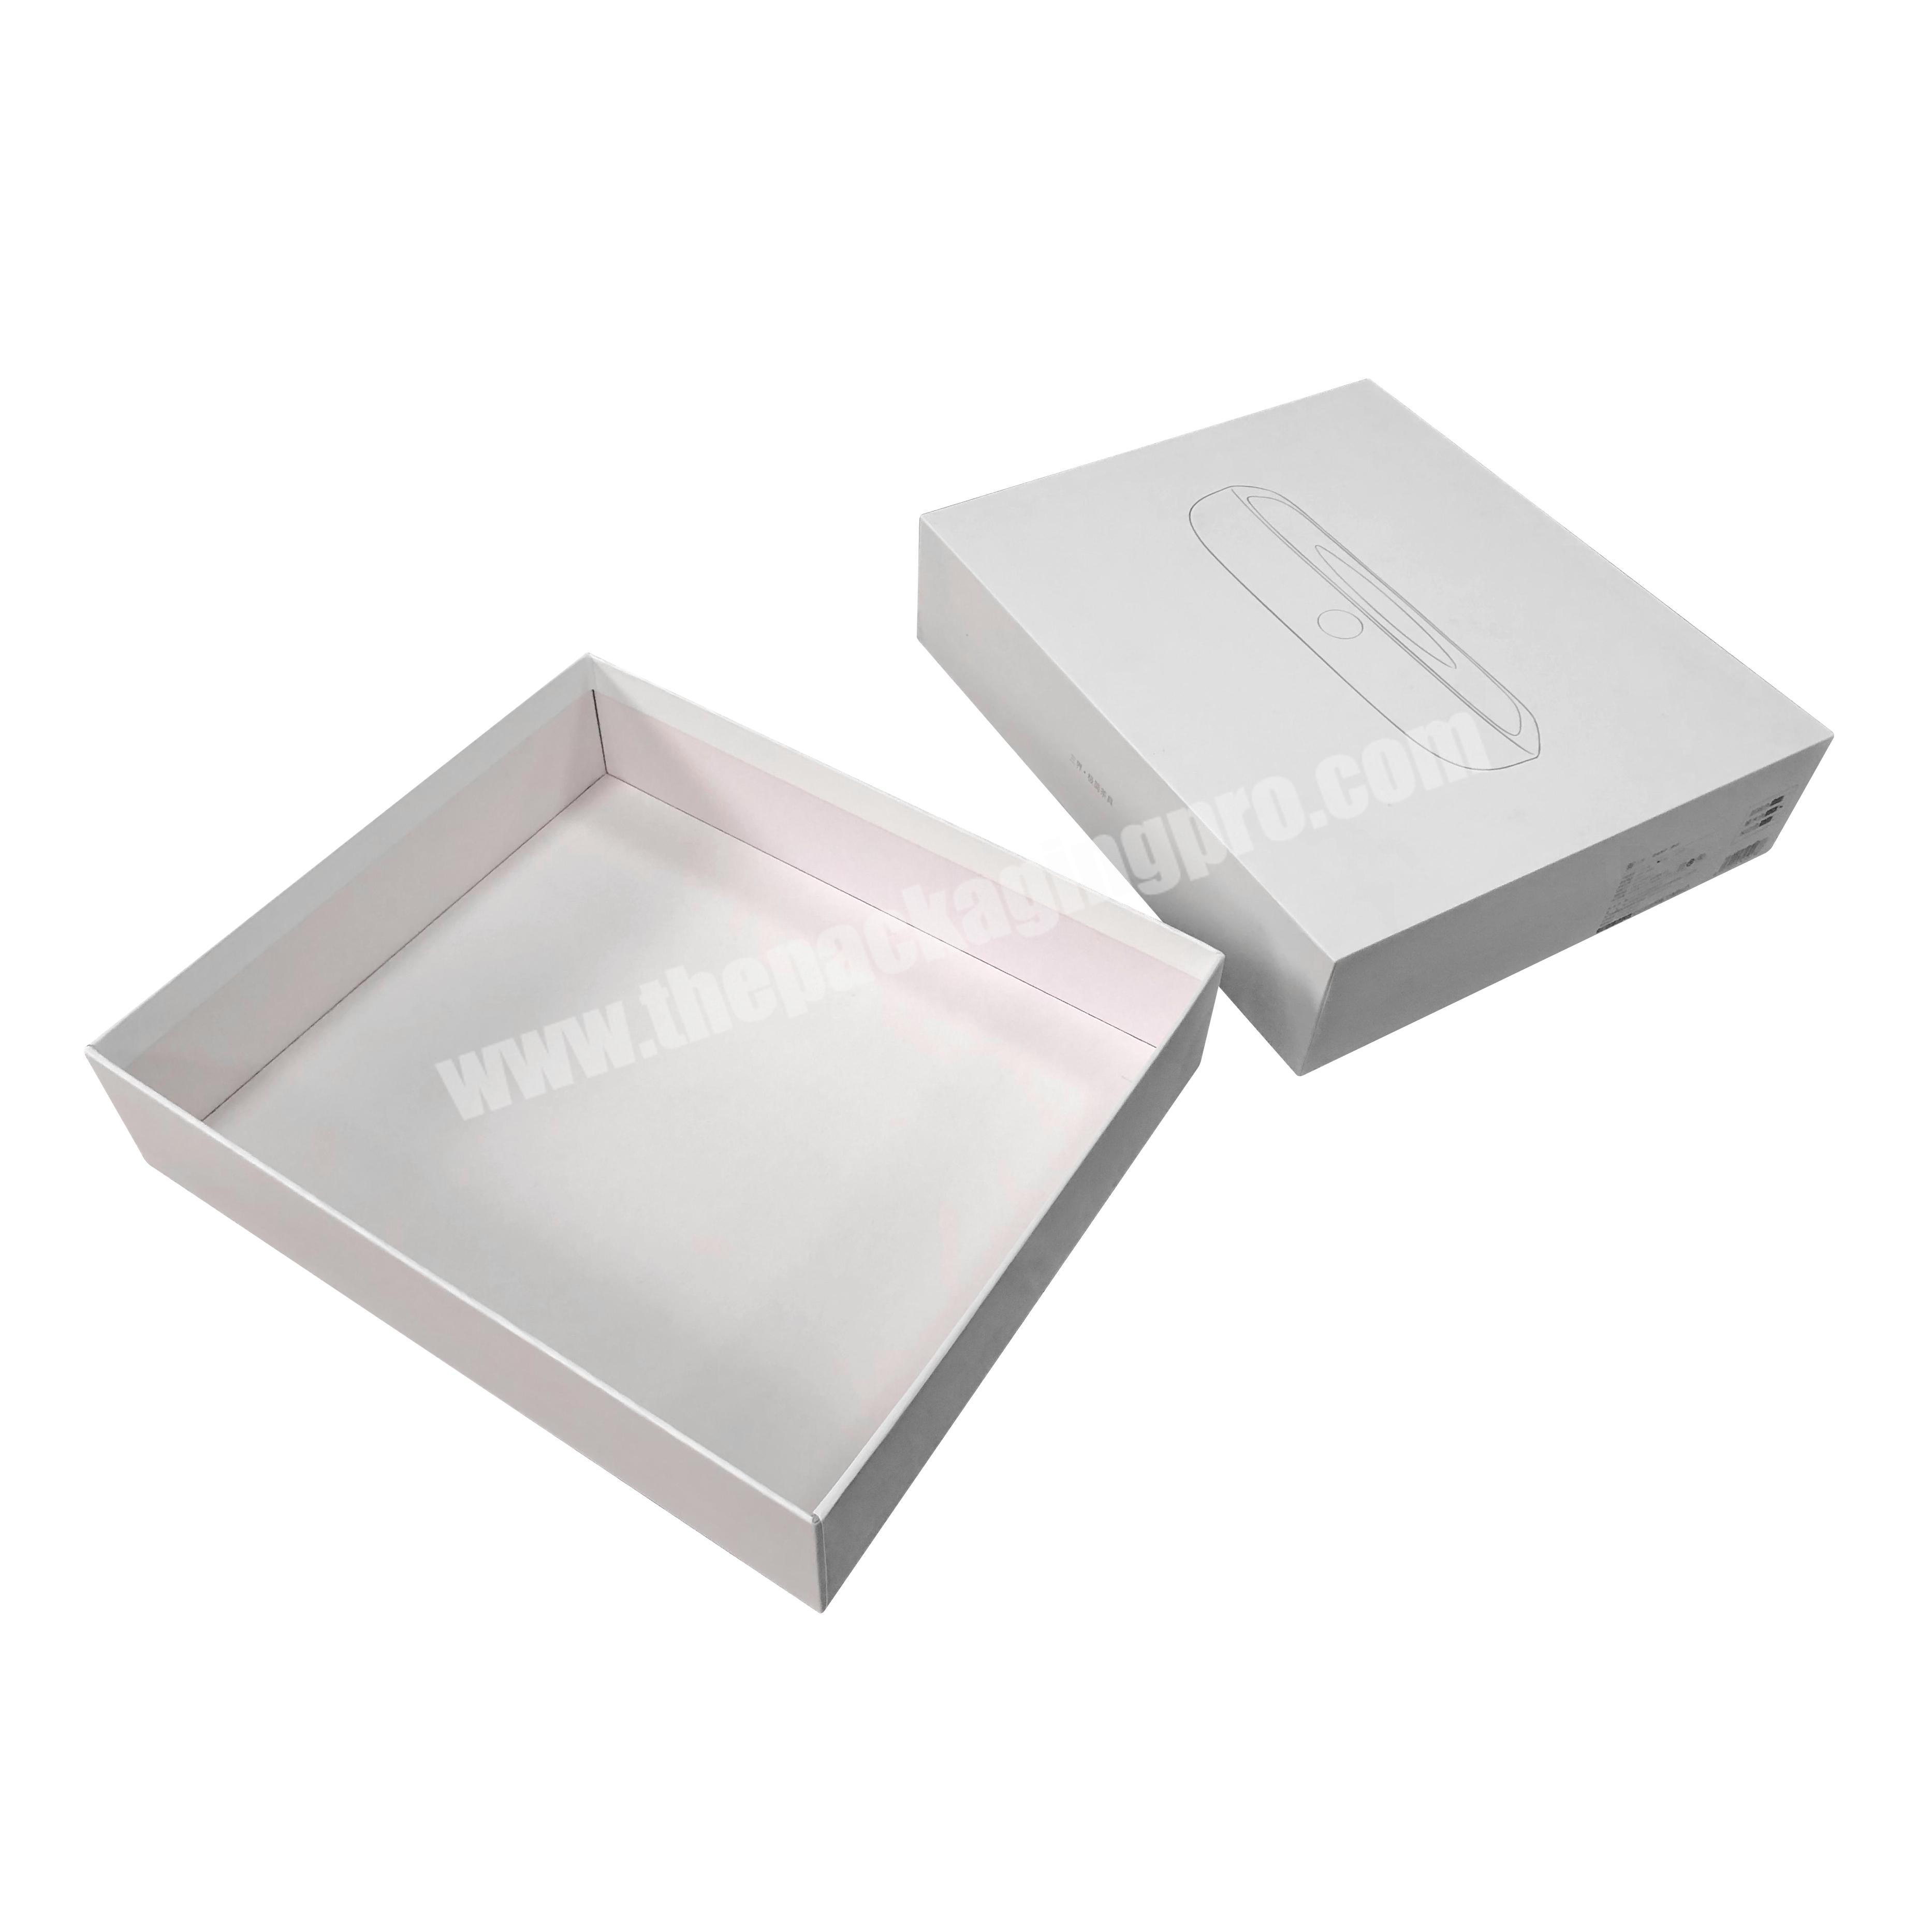 Professional logo printed recycled hair extension packaging gift box